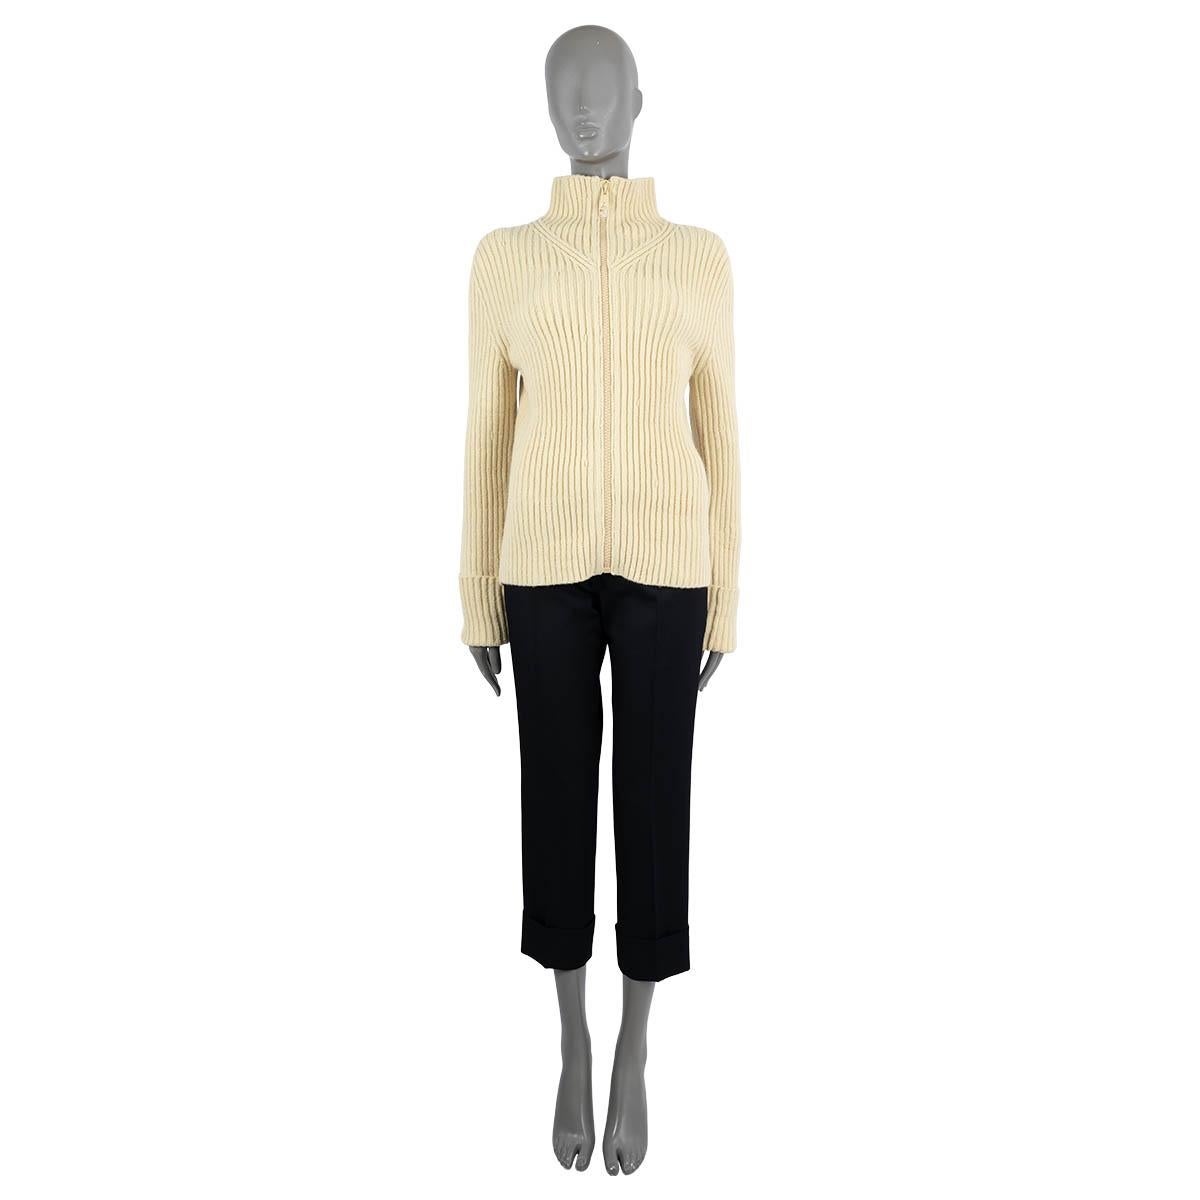 100% authentic Bottega Veneta zip-front cardigan in Butter (beige) rib-knit wool (92%), polyamide (7%) and elastane (1%). Features a high-neck, extra long sleeves and chunky knit.

2020 Fall/Winter

Measurements
Model	640084V07XO
Tag